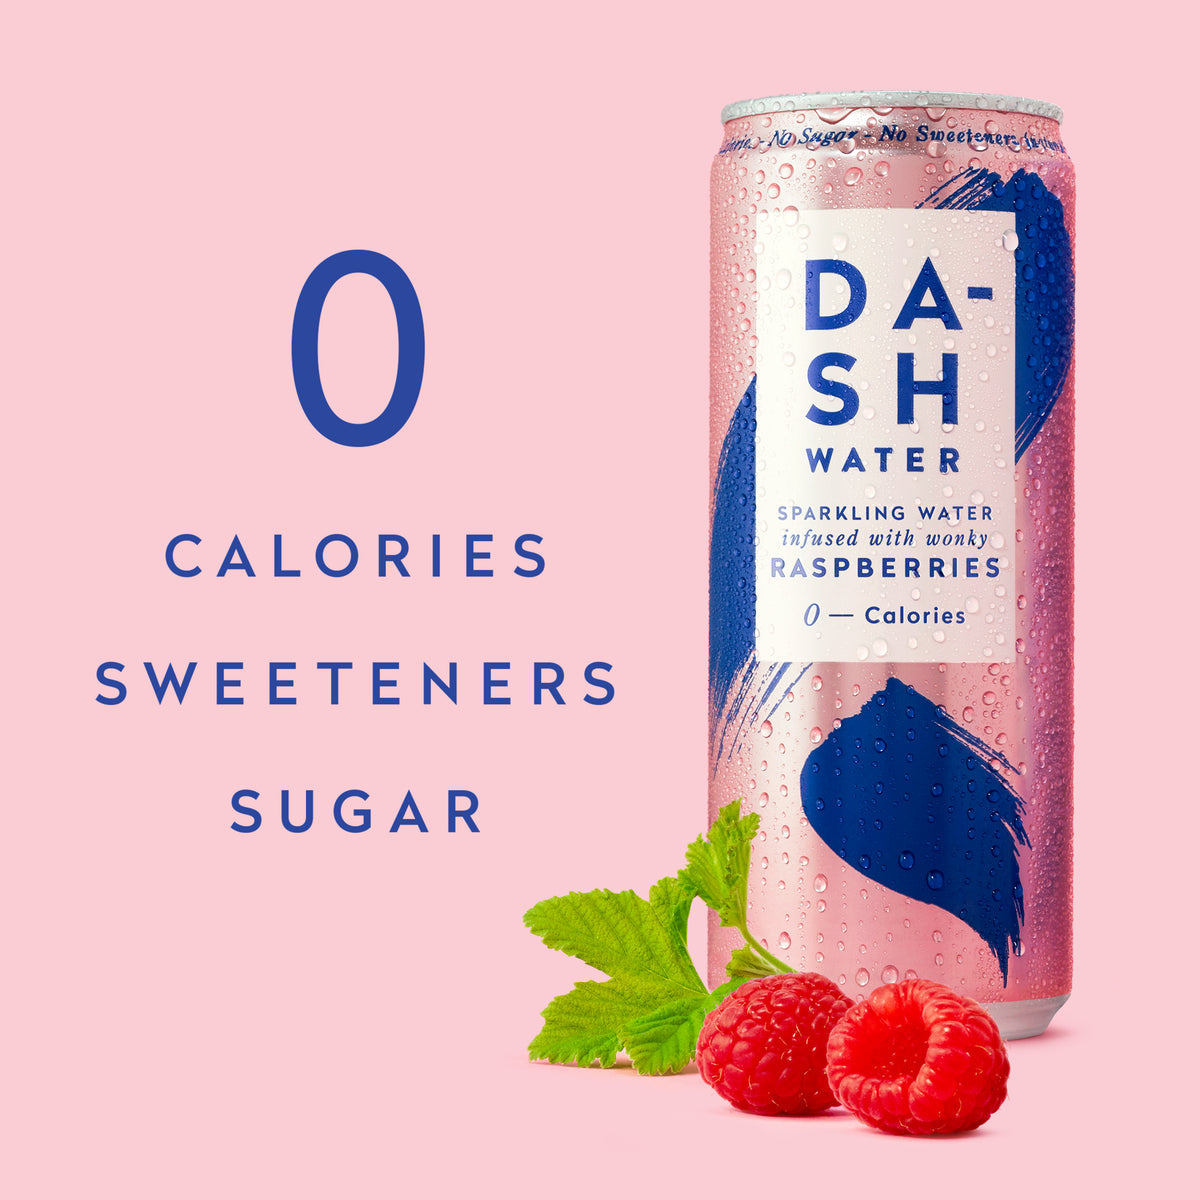 Dash raspberry sparkling water made with real raspberries